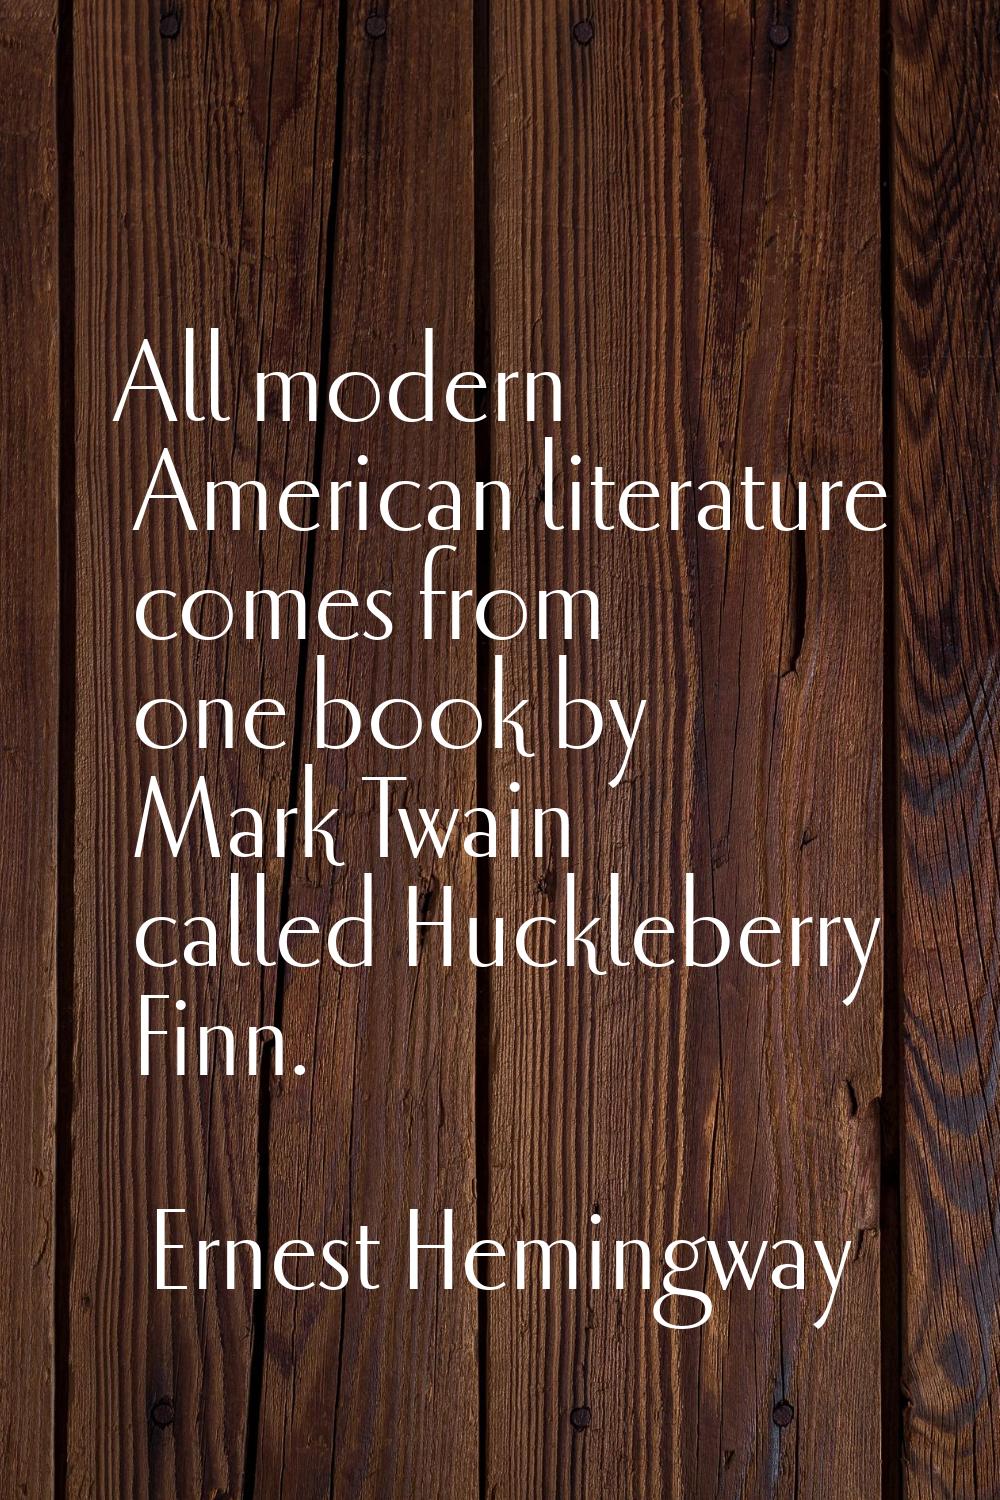 All modern American literature comes from one book by Mark Twain called Huckleberry Finn.